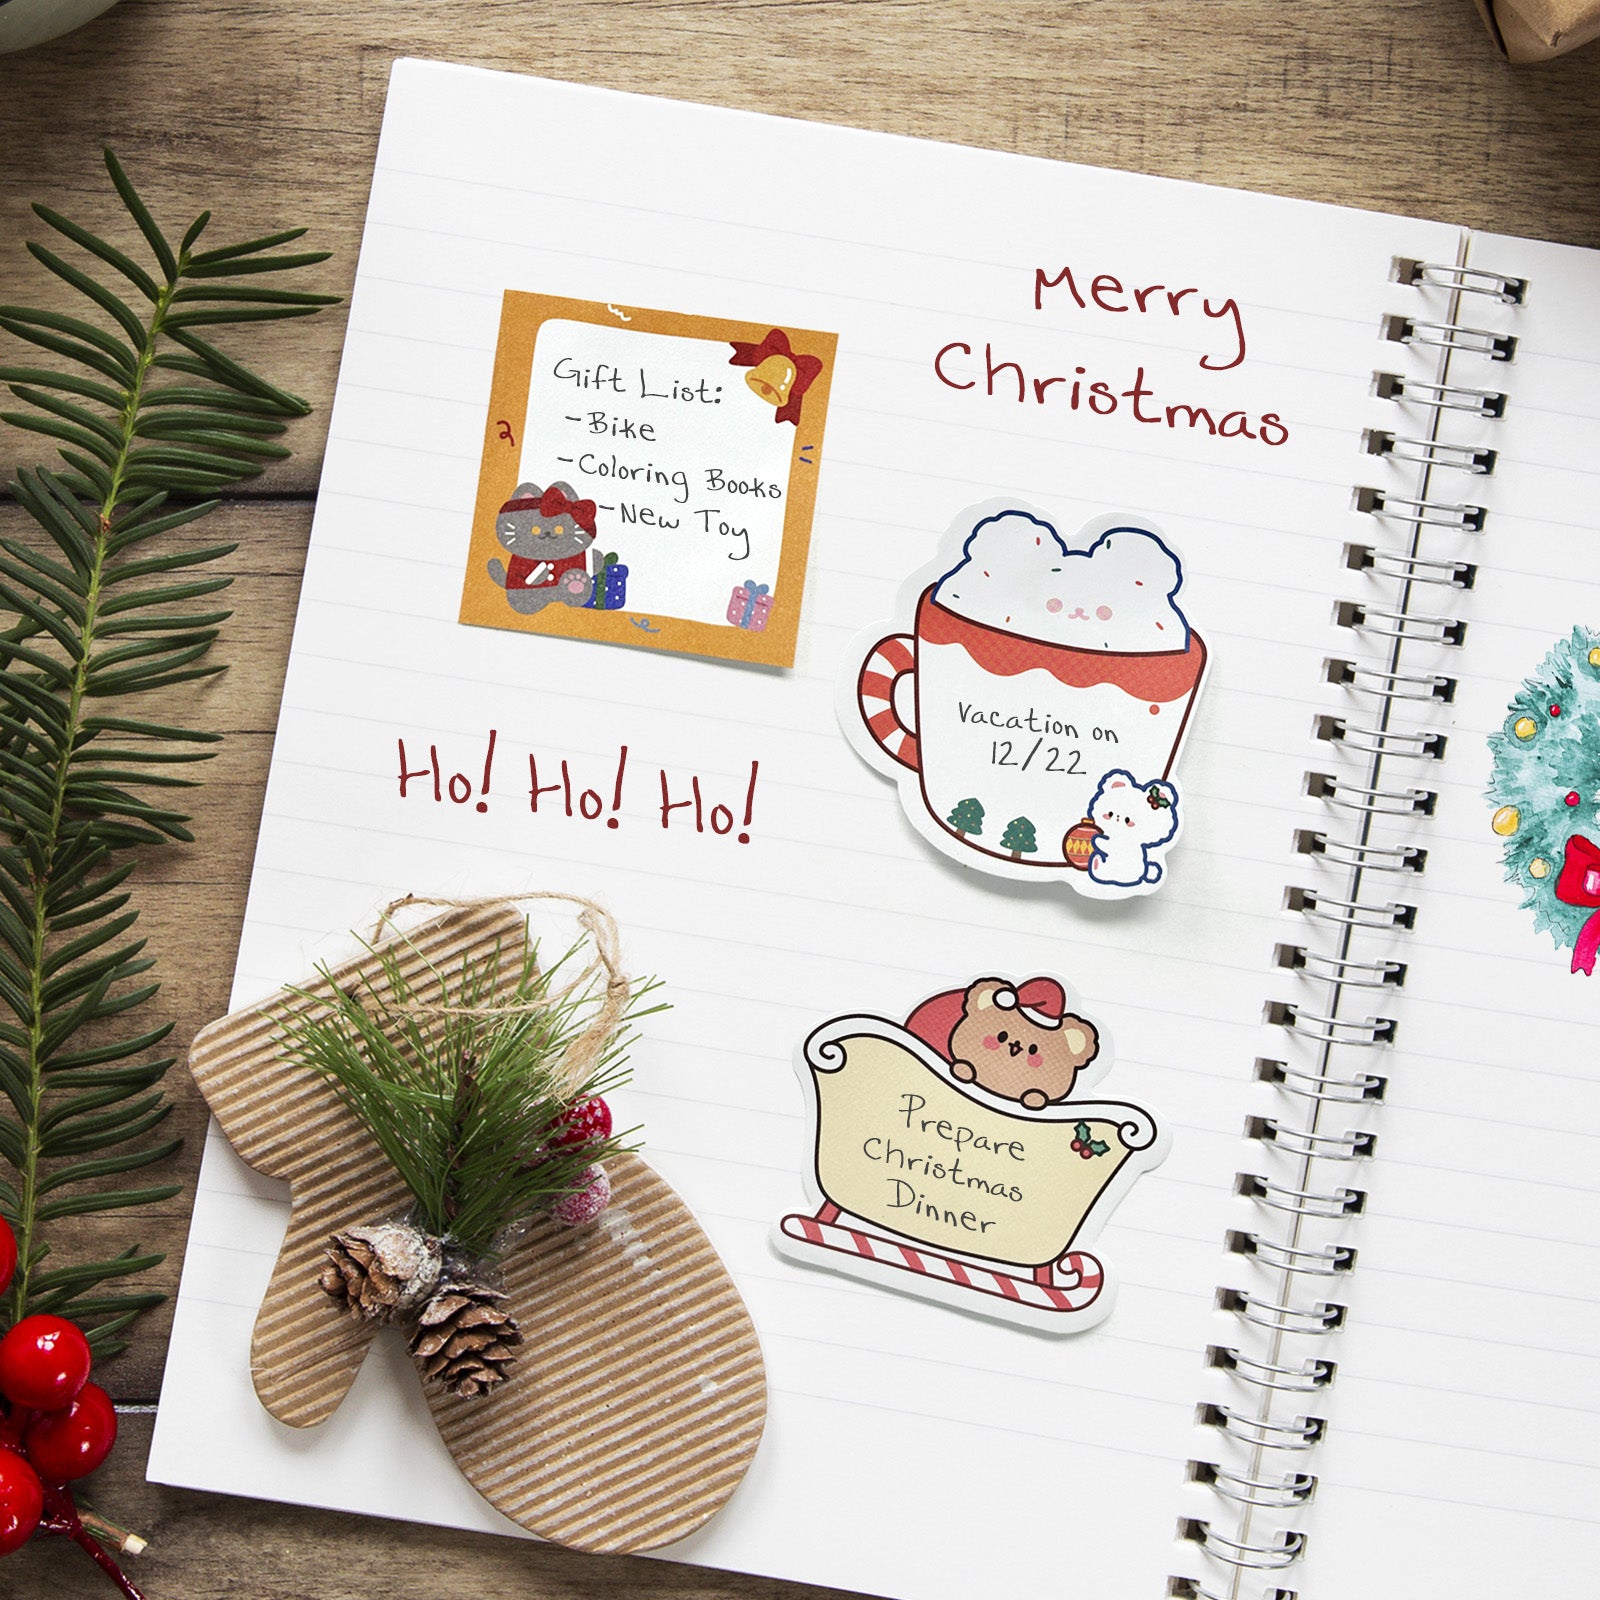 Notes 50 Memo Present Notepads Notepads Christmas Pieces Holidays